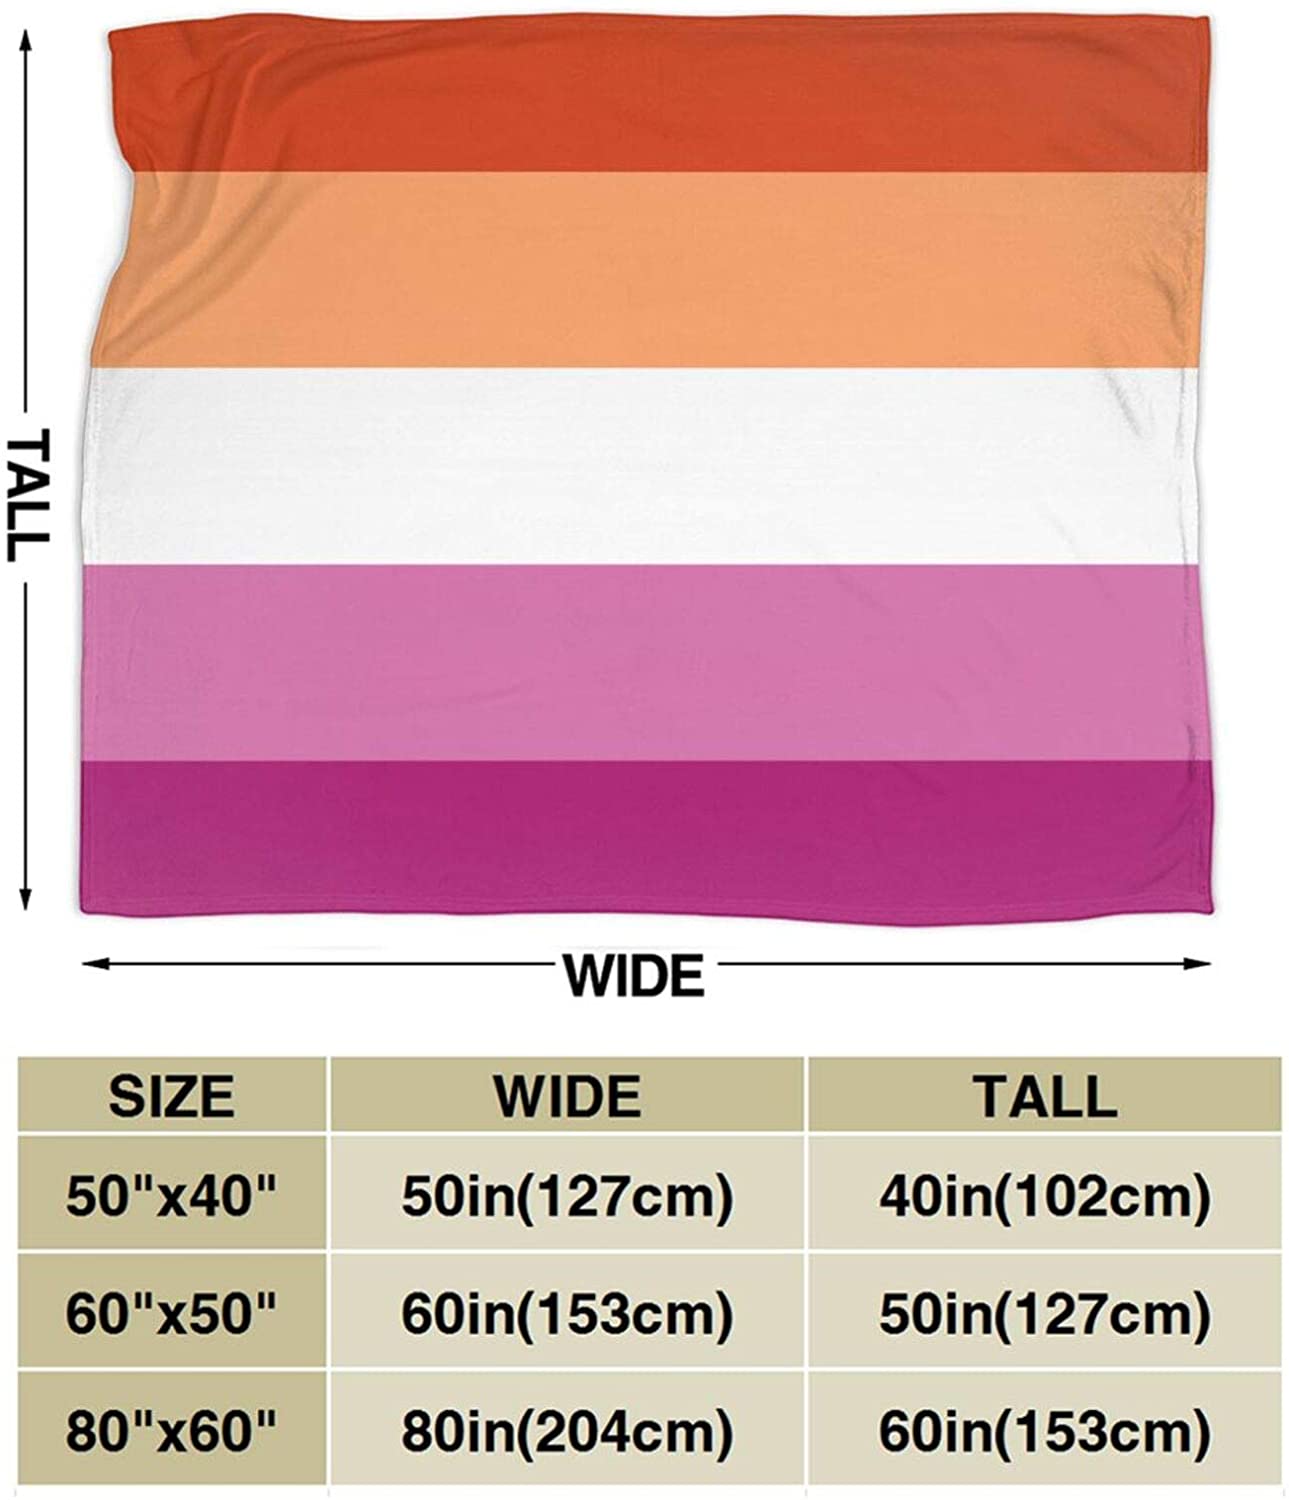 Lgbt Gay Lesbian Super Soft Fuzzy Warm Cozy Micro Fleece Blanket/ Lesbian Blankets Suitable For Sofa Bed Couch 80"X60"